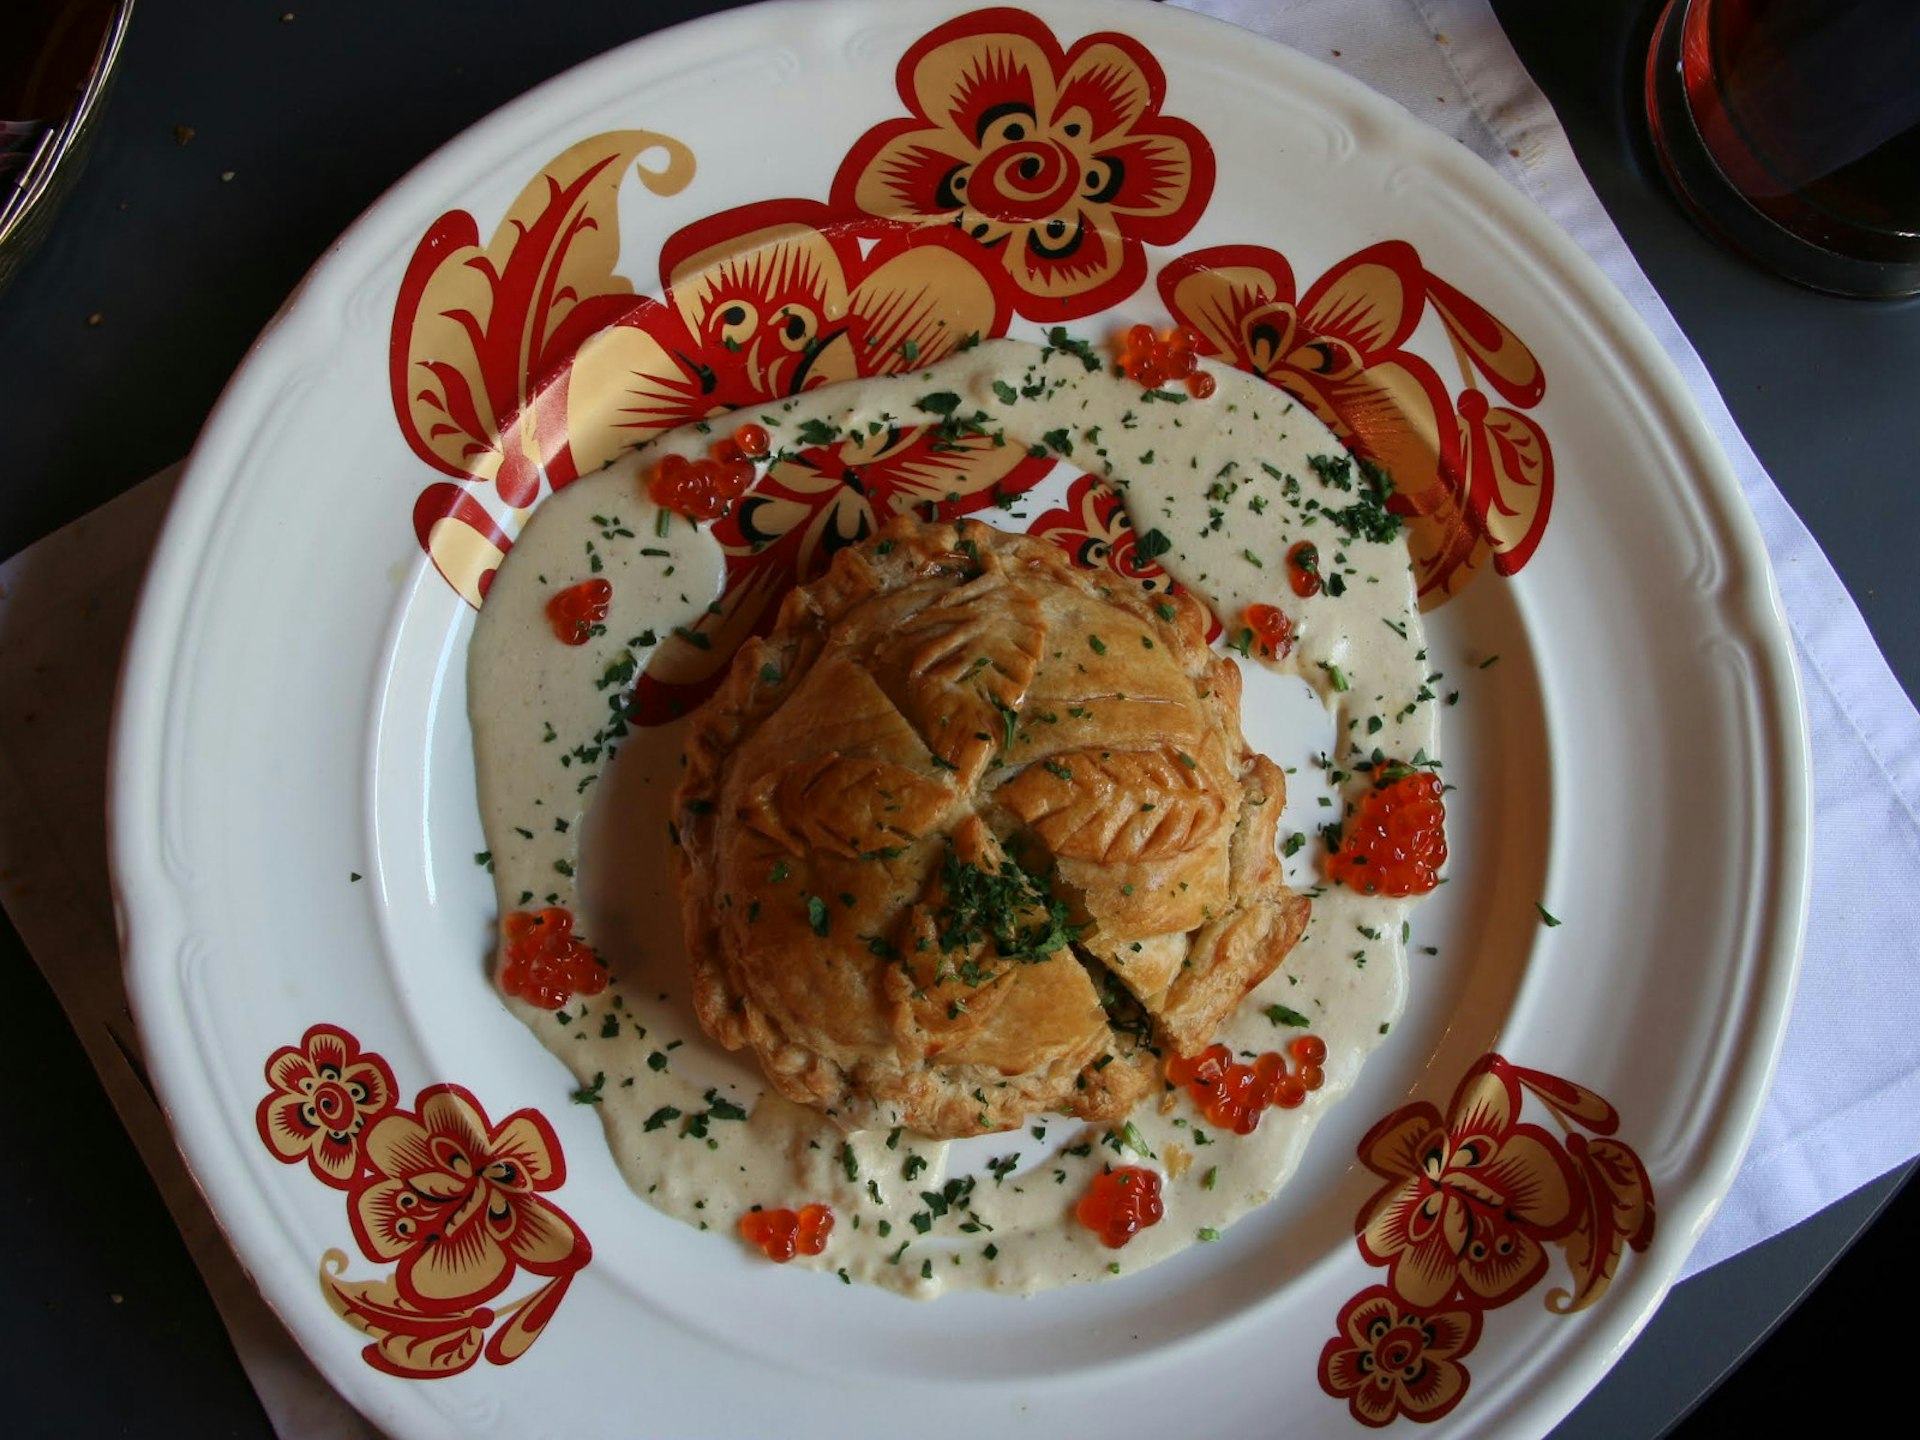 This St Petersburg take on the classic meat pie is stuffed with losos (salmon) © Simon Richmond / Lonely Planet